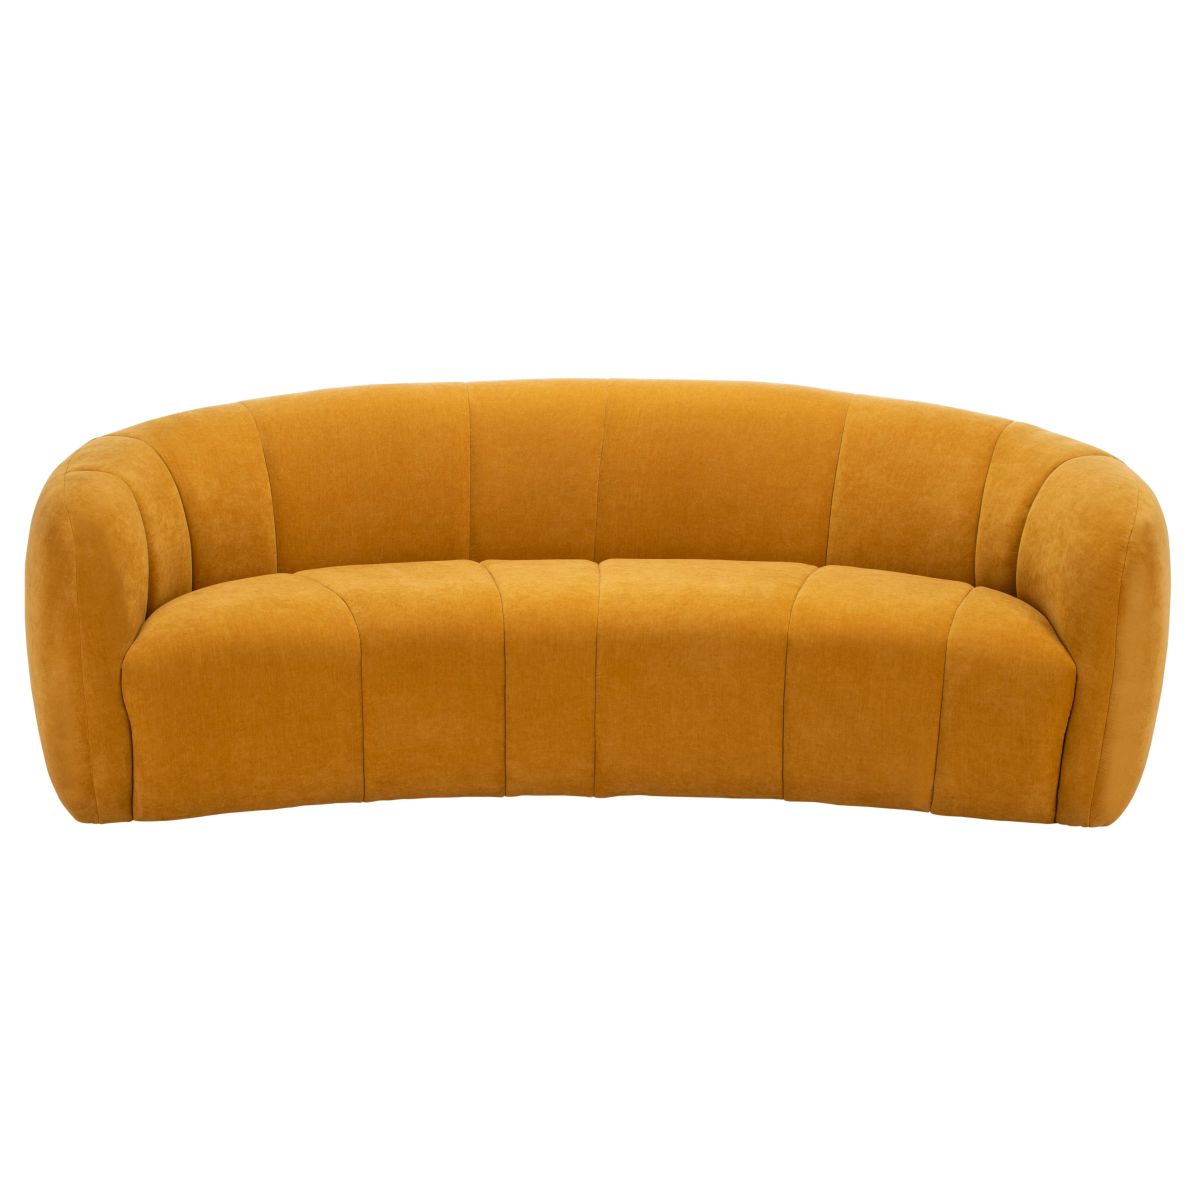 Safavieh Couture Alliya Channel Tufted Curved Sofa - Mustard